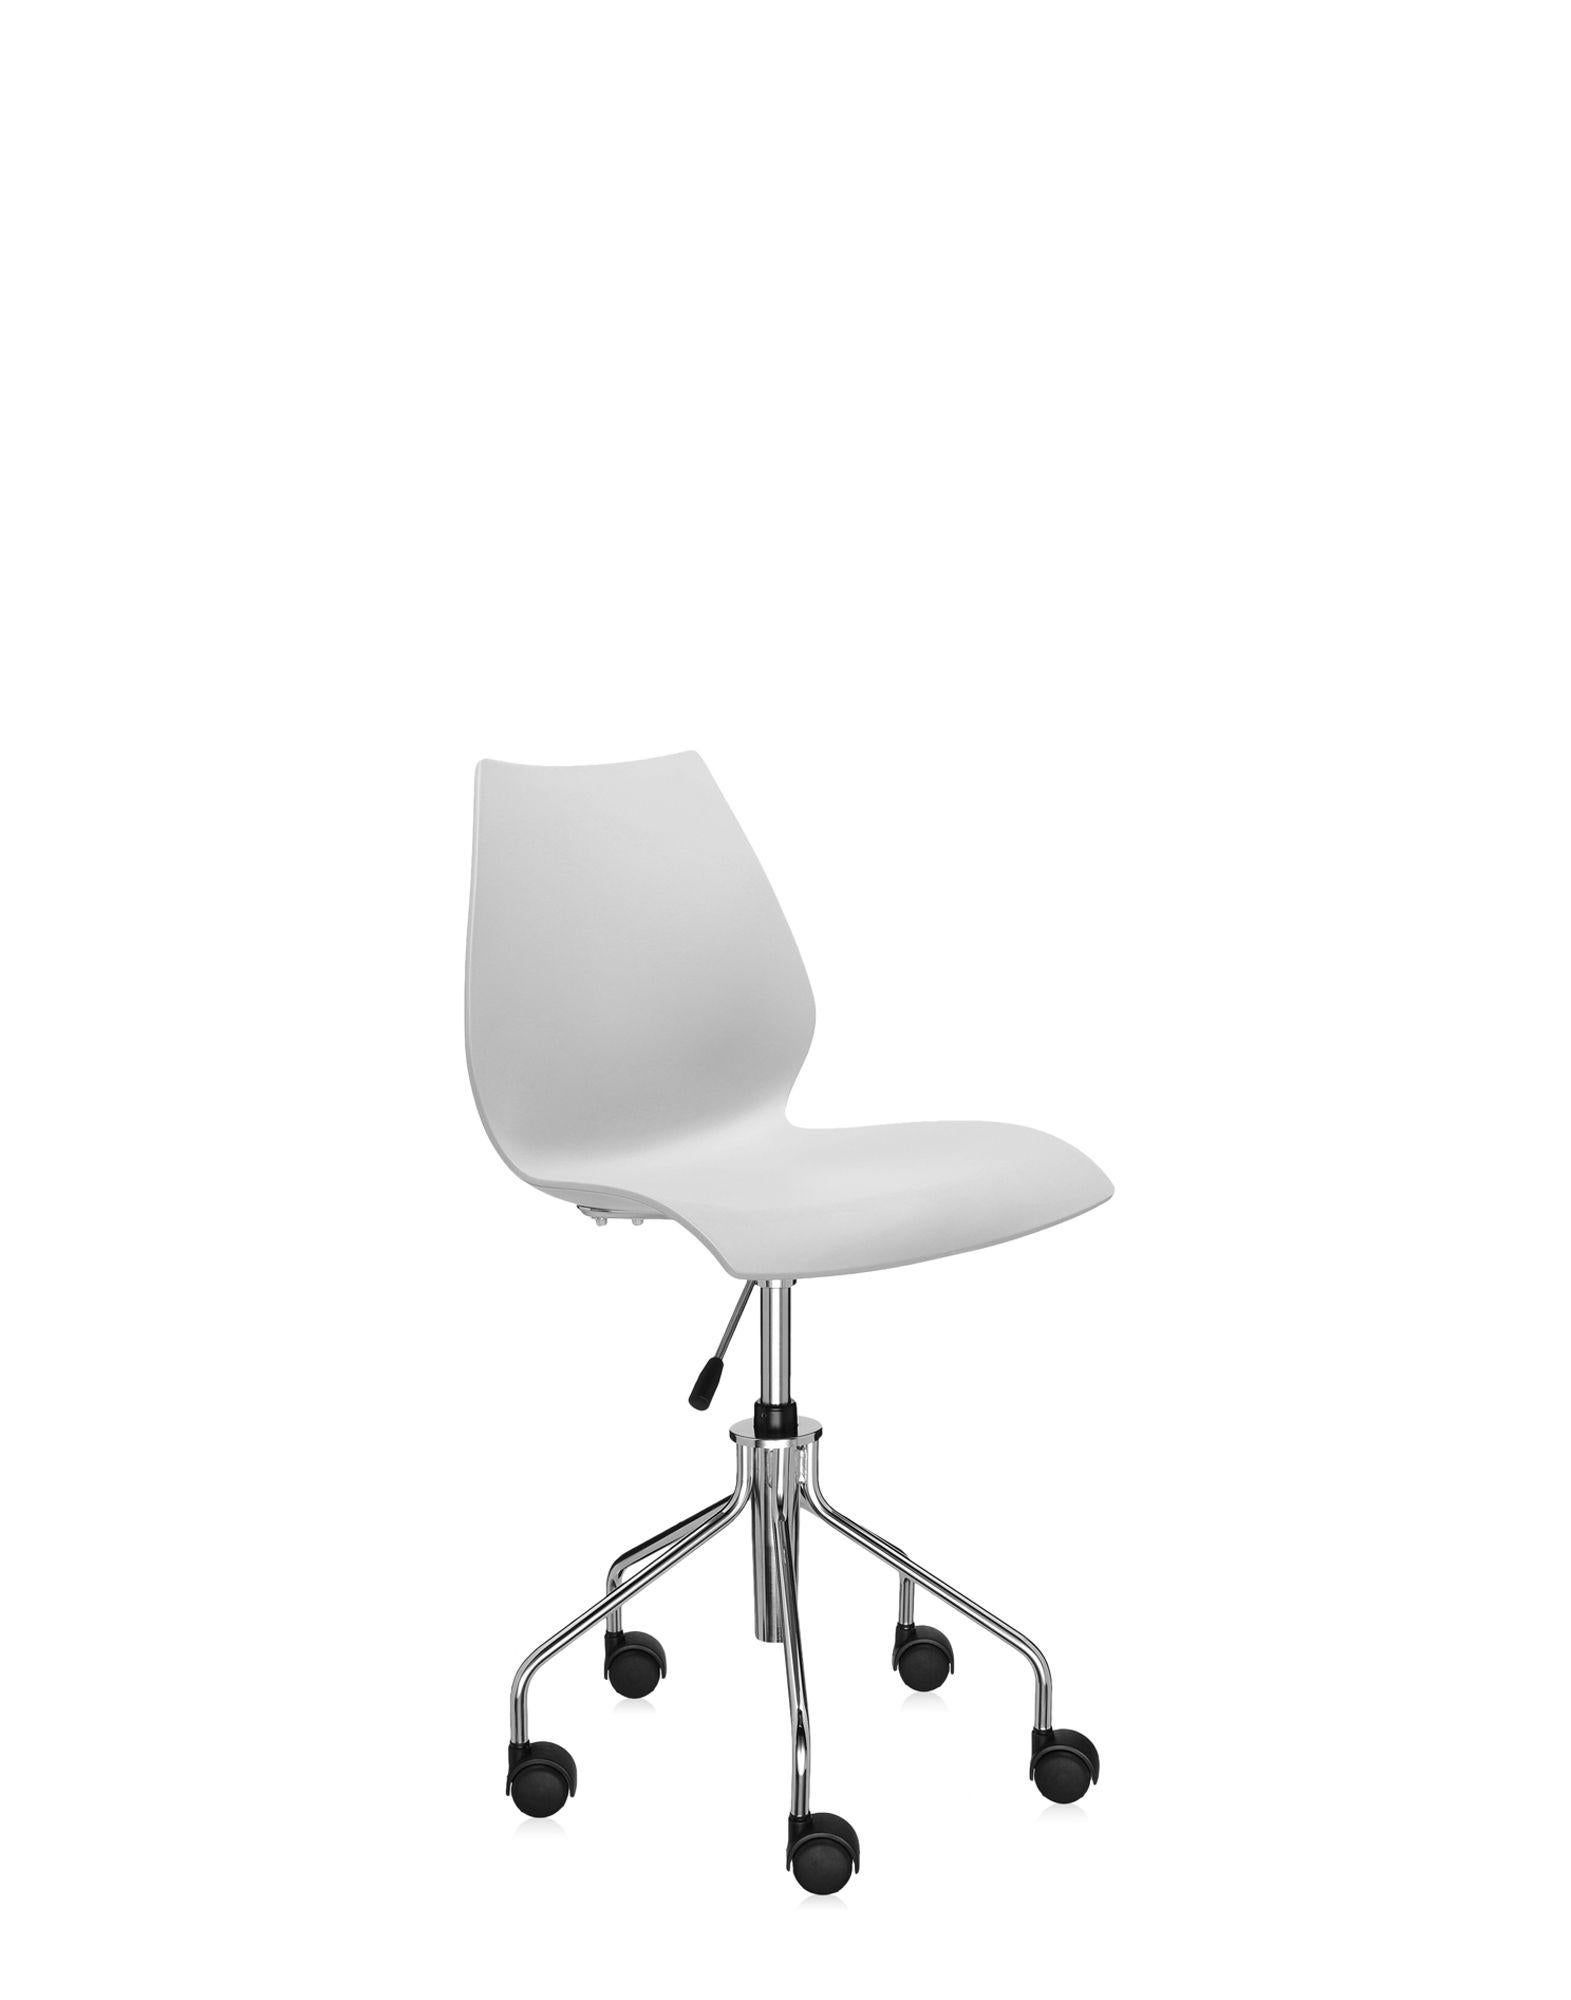 Italian Kartell Maui Swivel Chair Adjustable in Pale Grey by Vico Magistretti